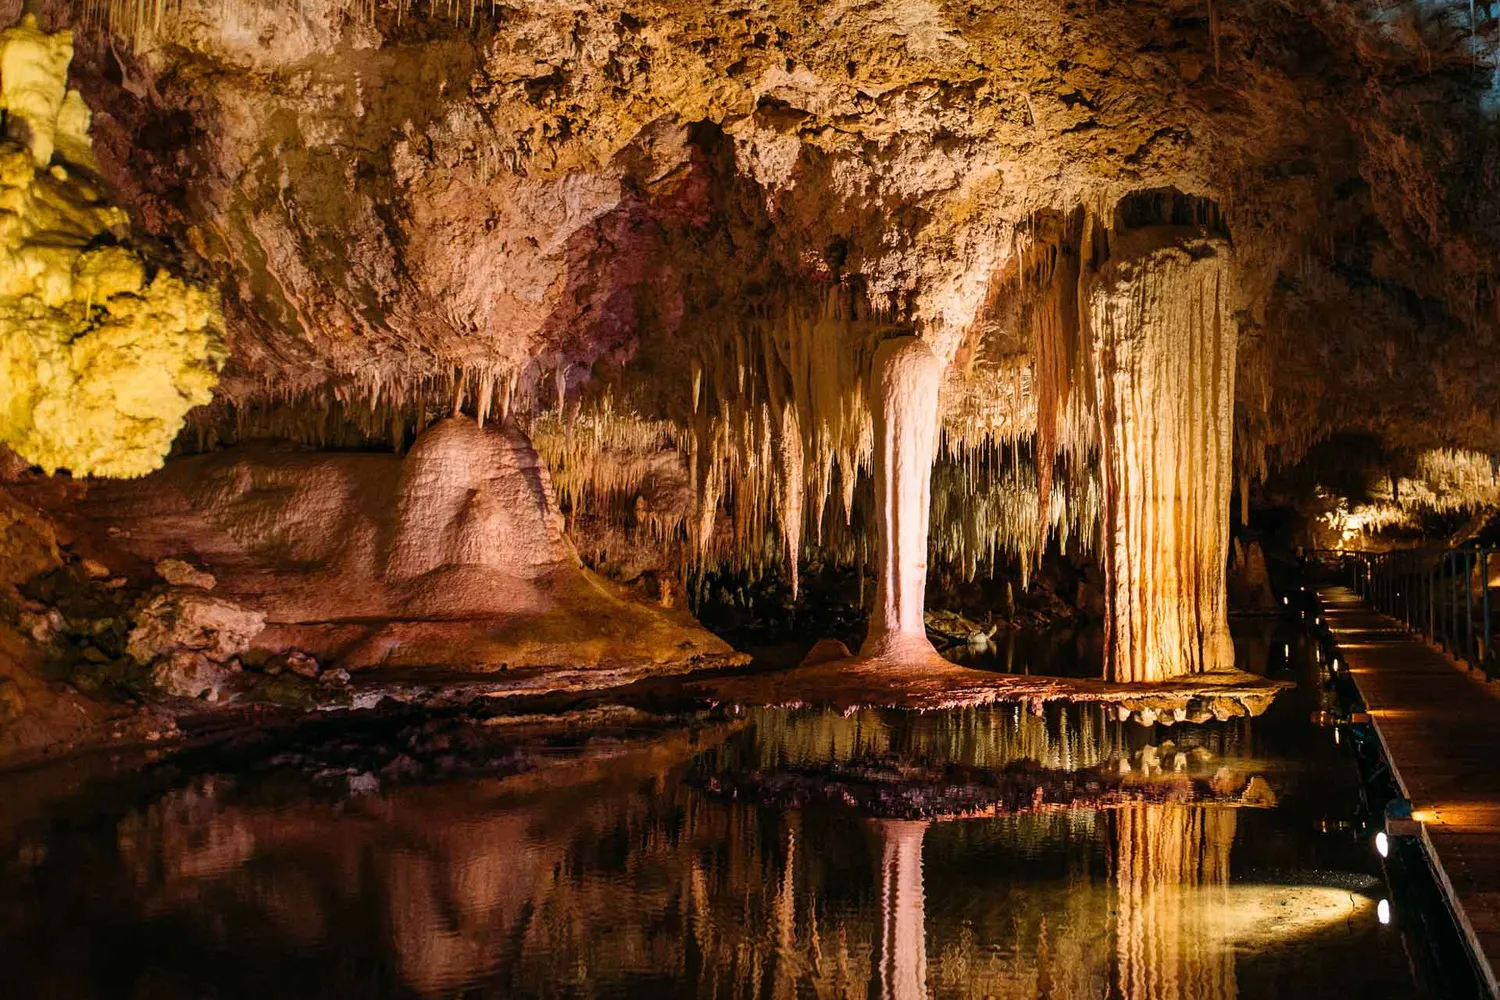 Magical lighting glistens over the water illuminating the enormous stalactites hanging from the roof of Lake Cave, Margaret River.